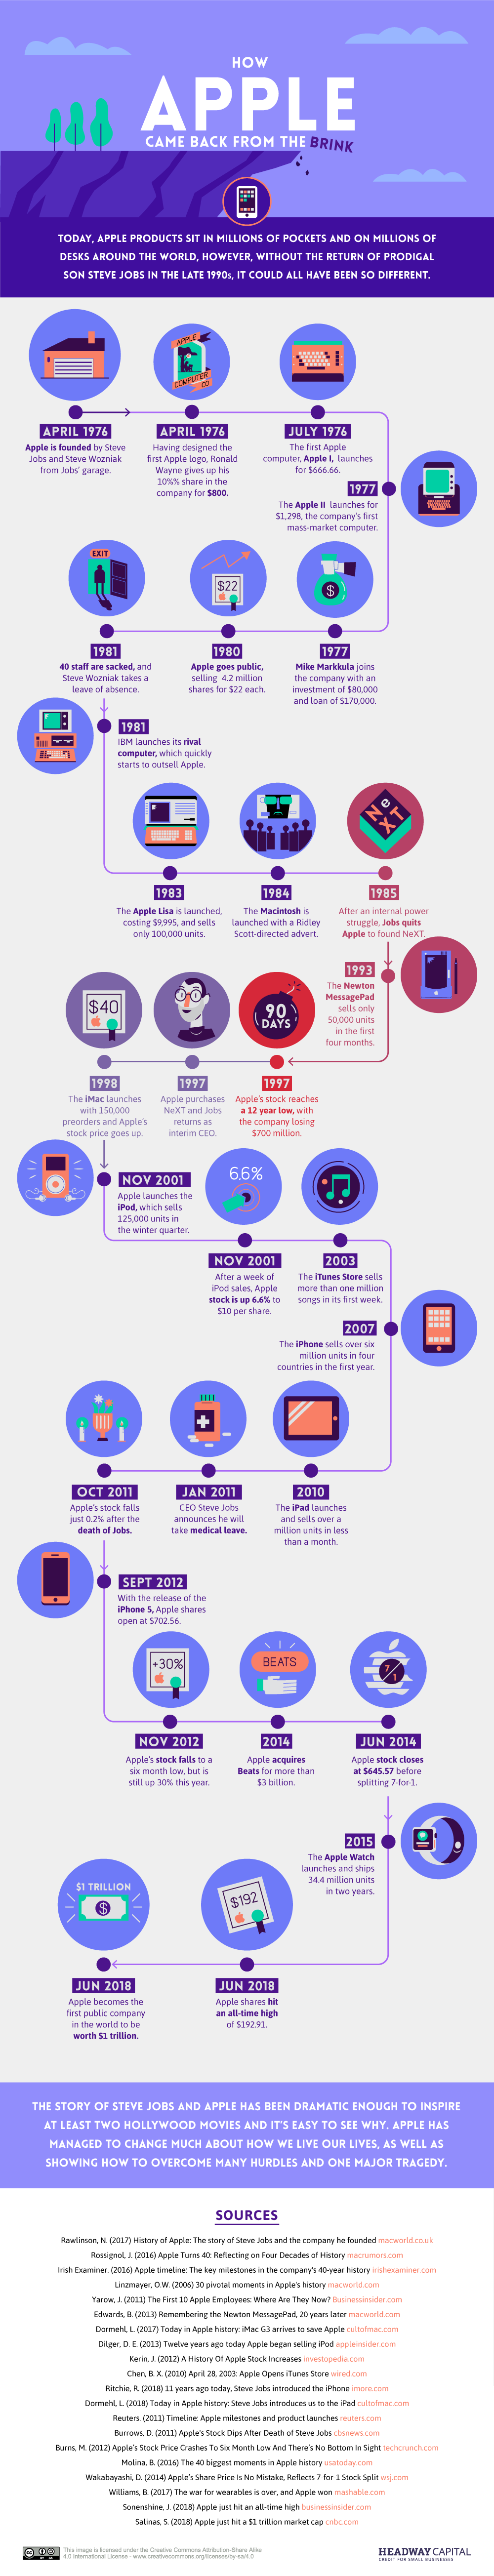 How Apple came back from the brink  [INFOGRAPHIC]